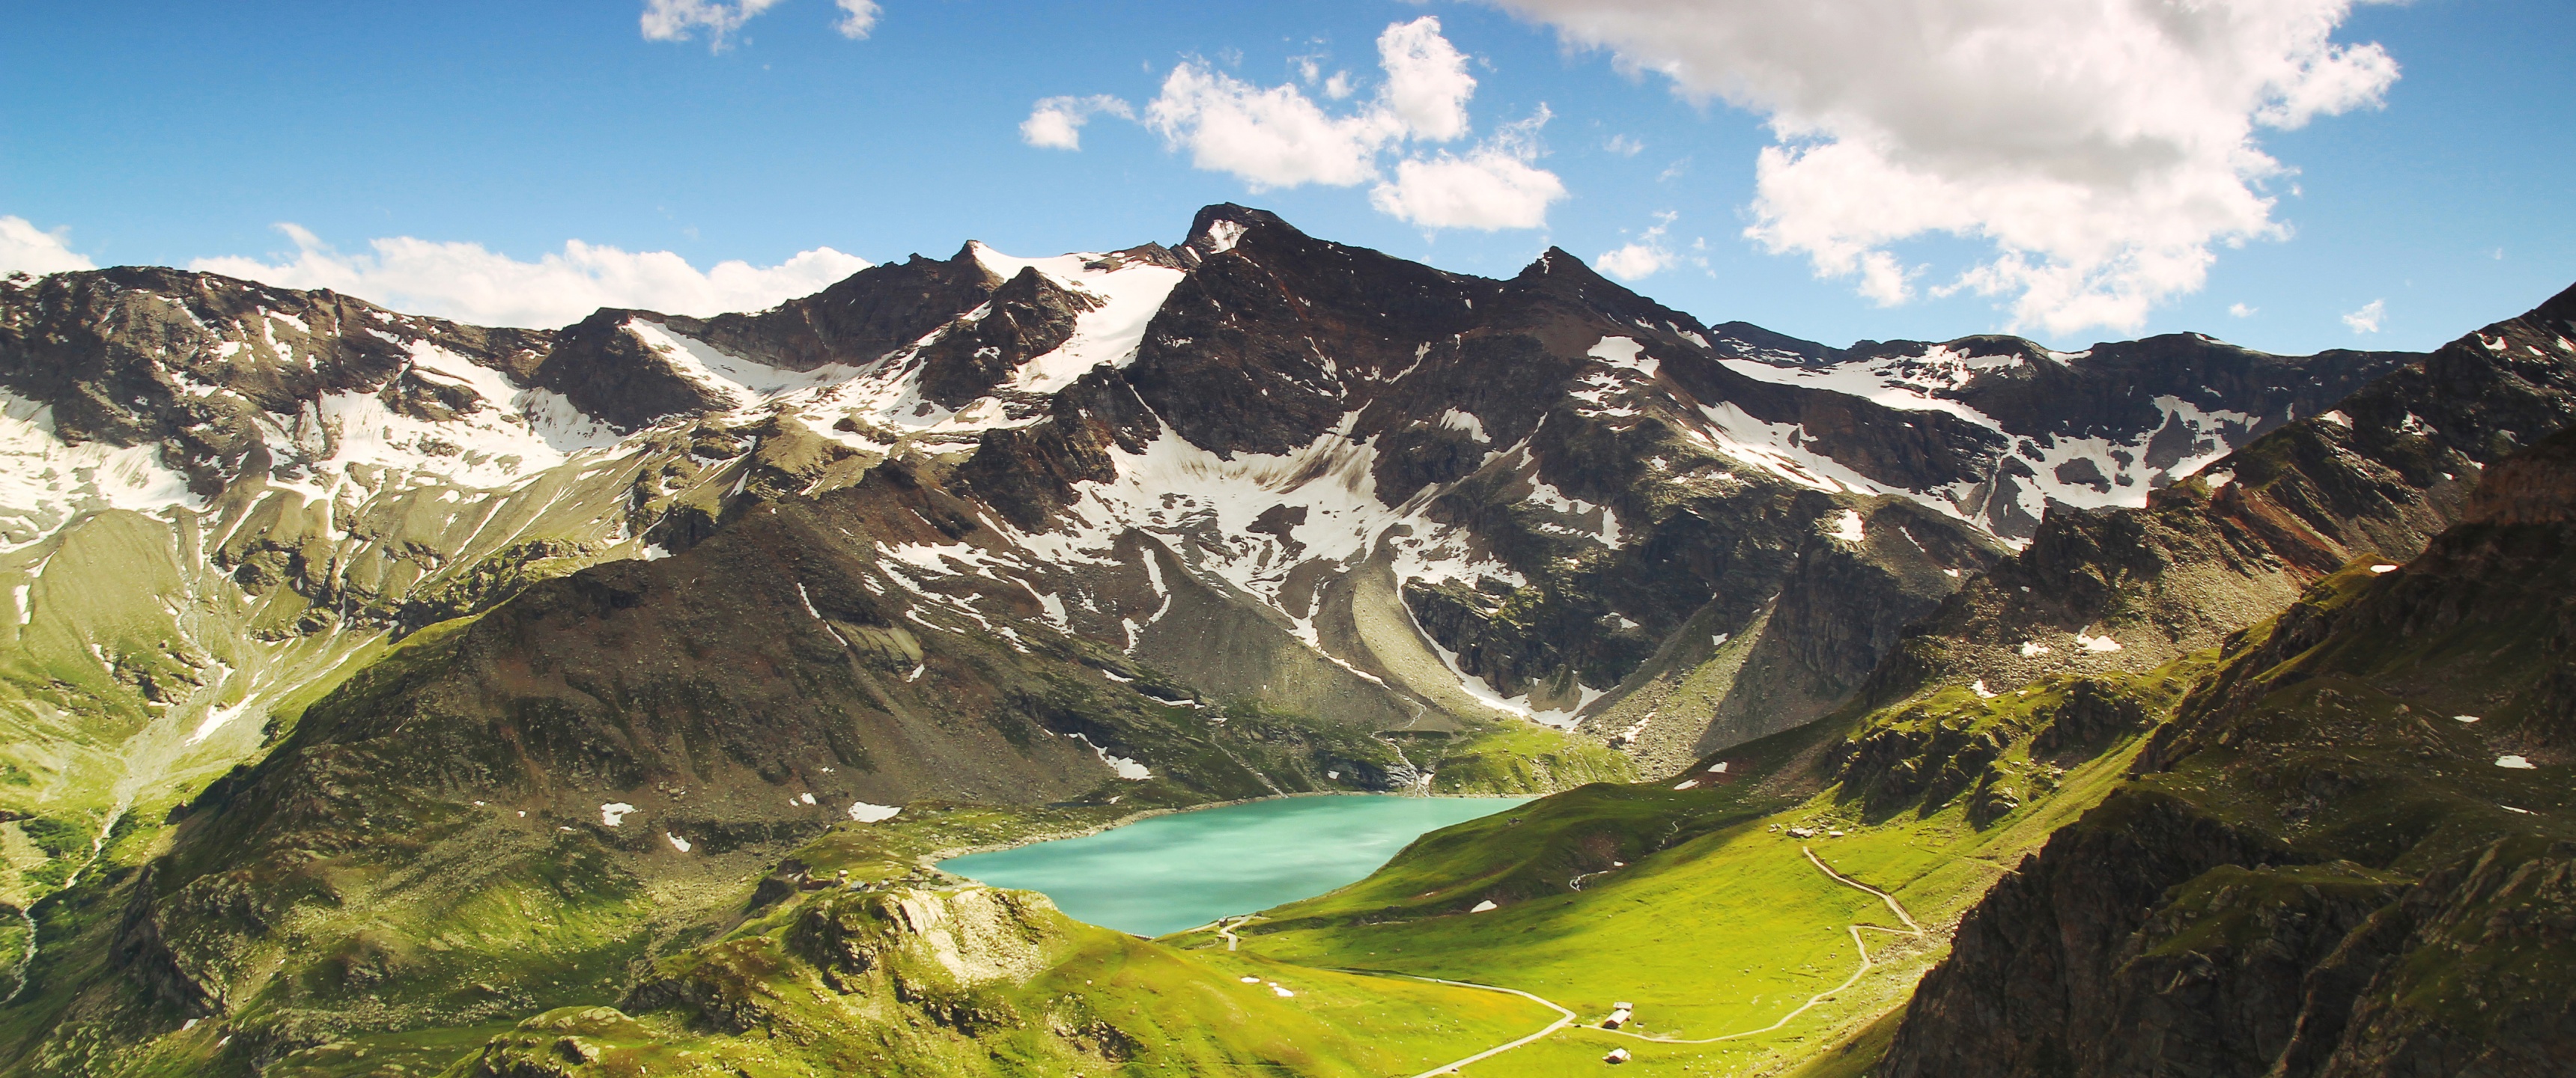 Ceresole Reale Wallpaper 4K, Summer, Mountains, Lake, Sunny day, Landscape, Nature